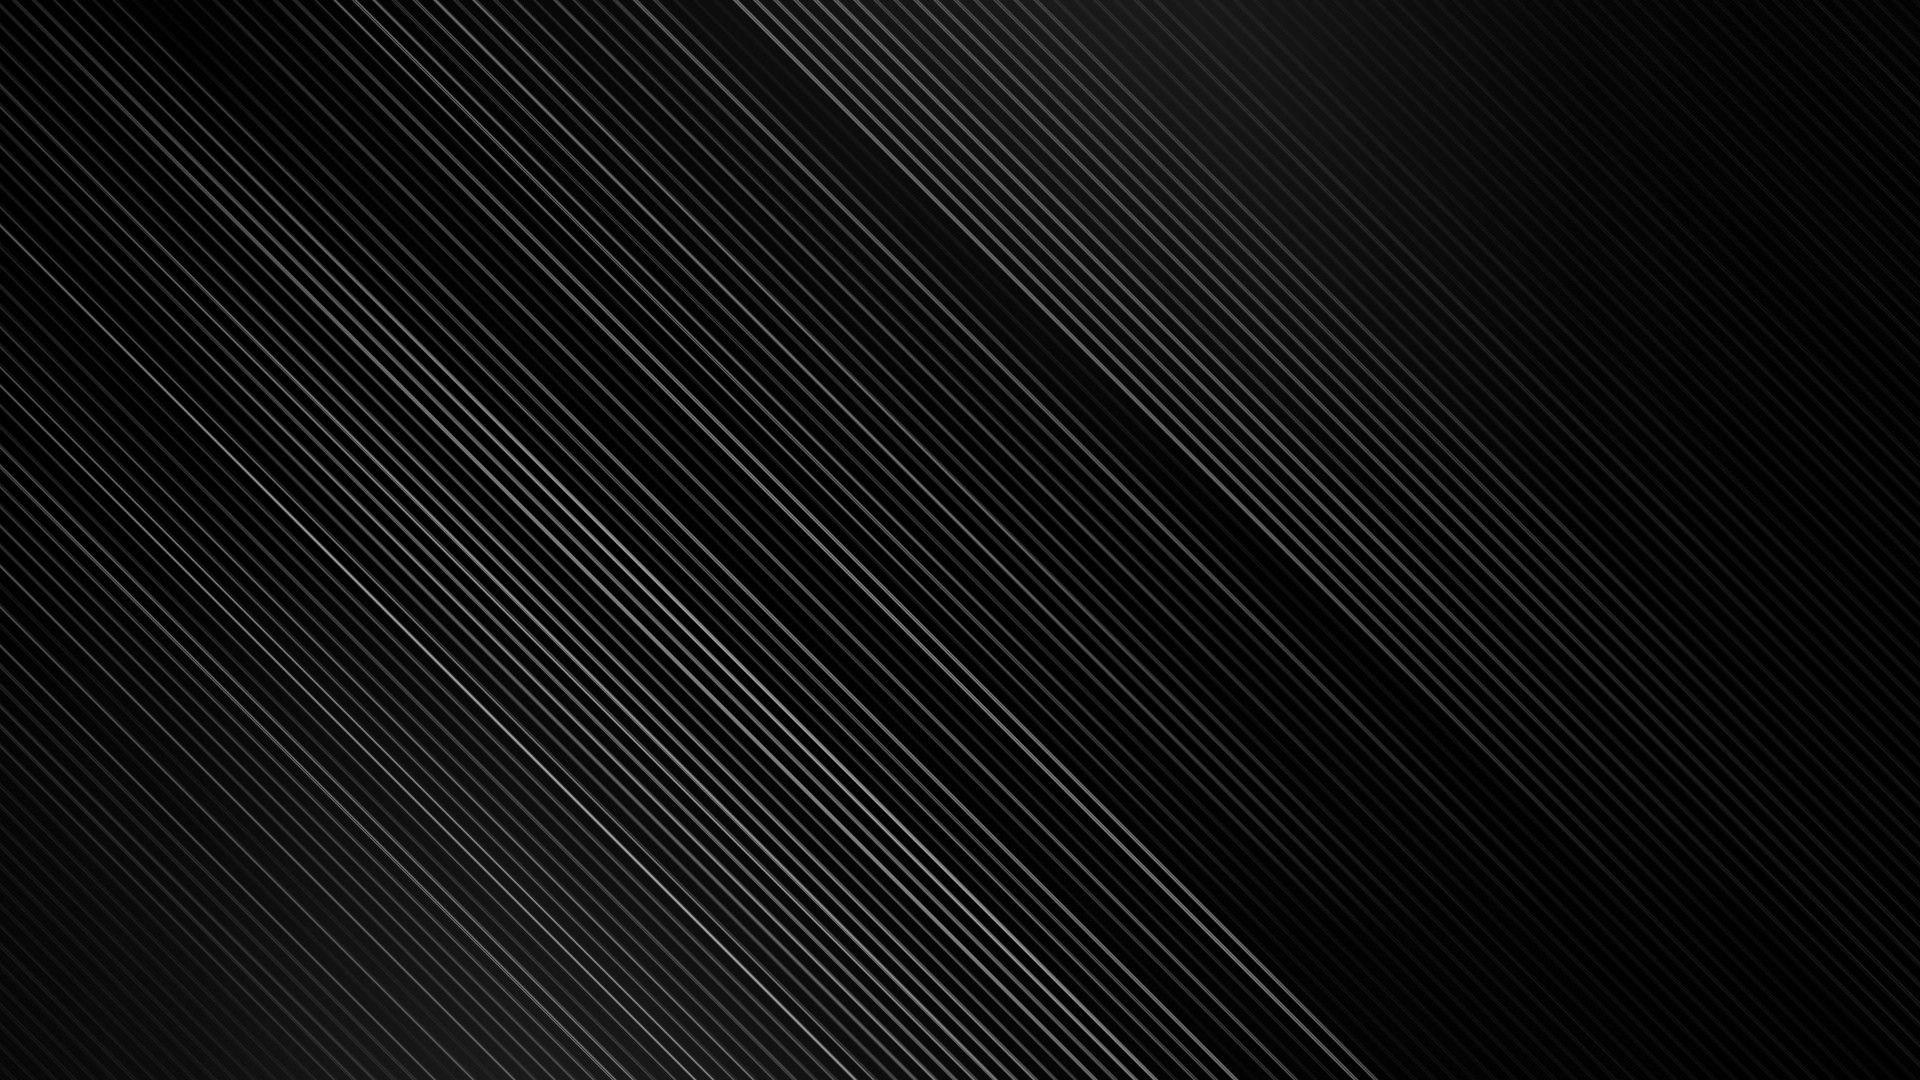 30 Stunning Minimalist Black And White Wallpaper Easy Download